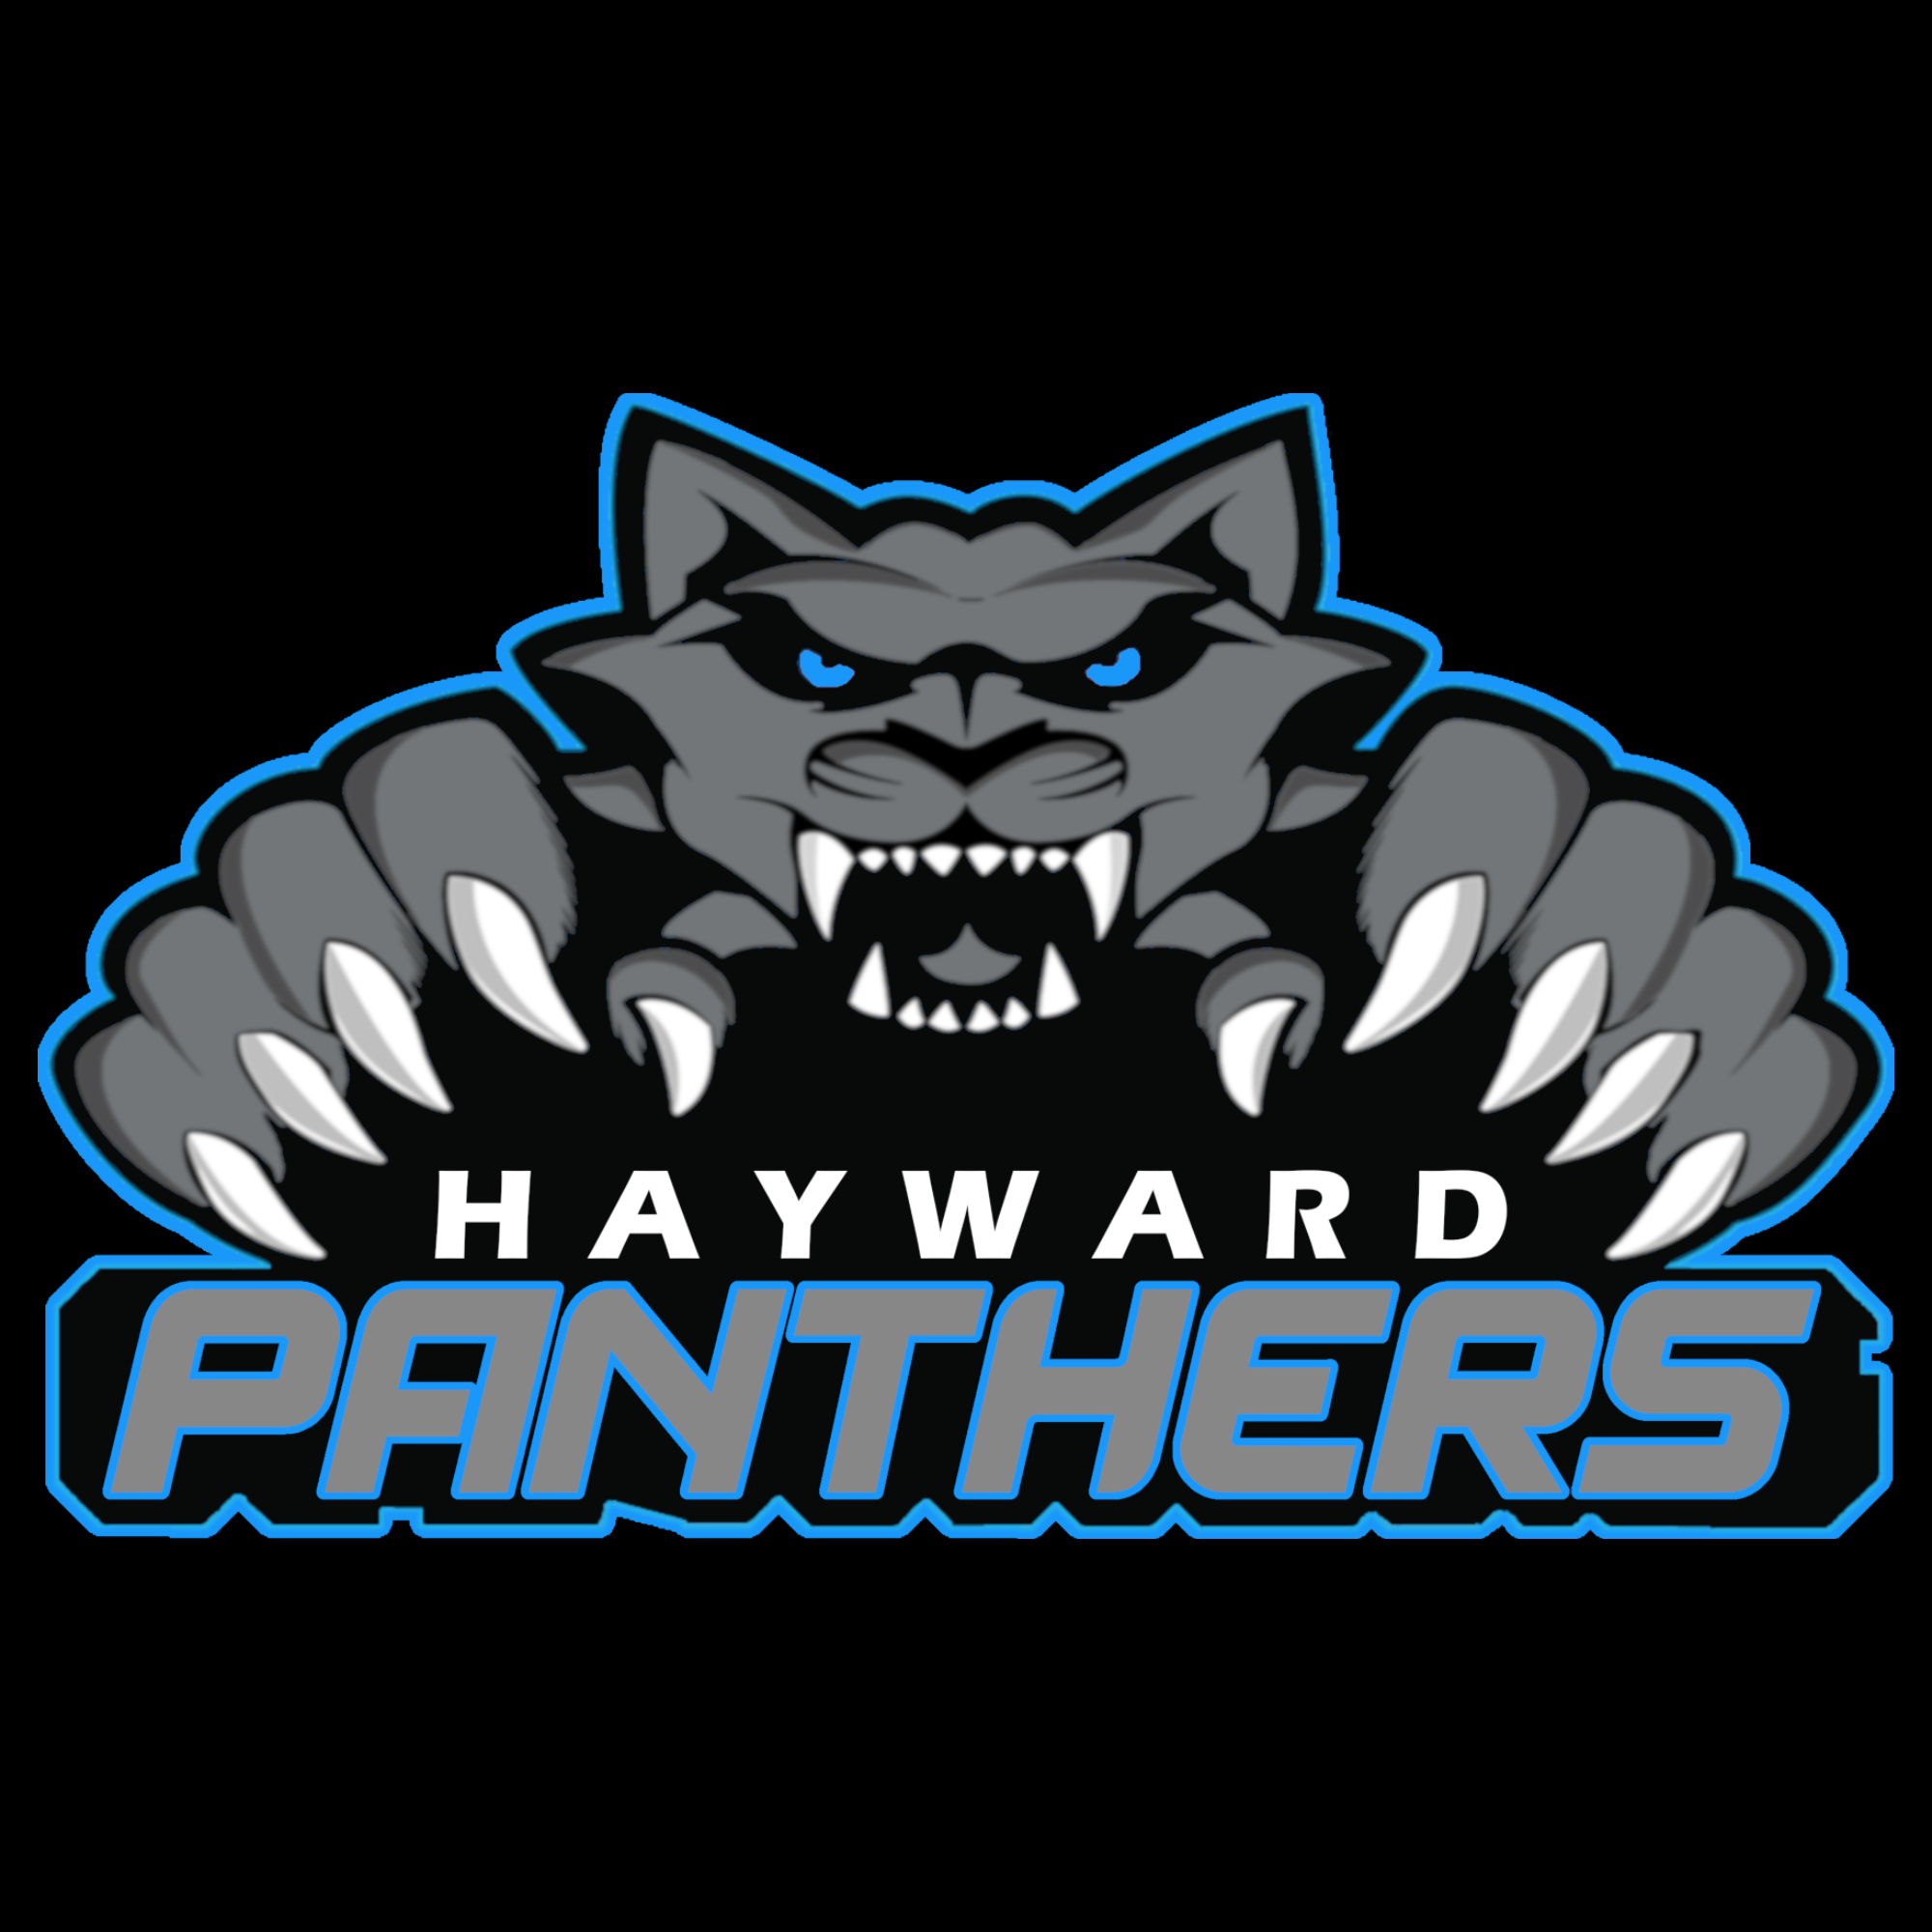 The official logo of Hayward Panthers